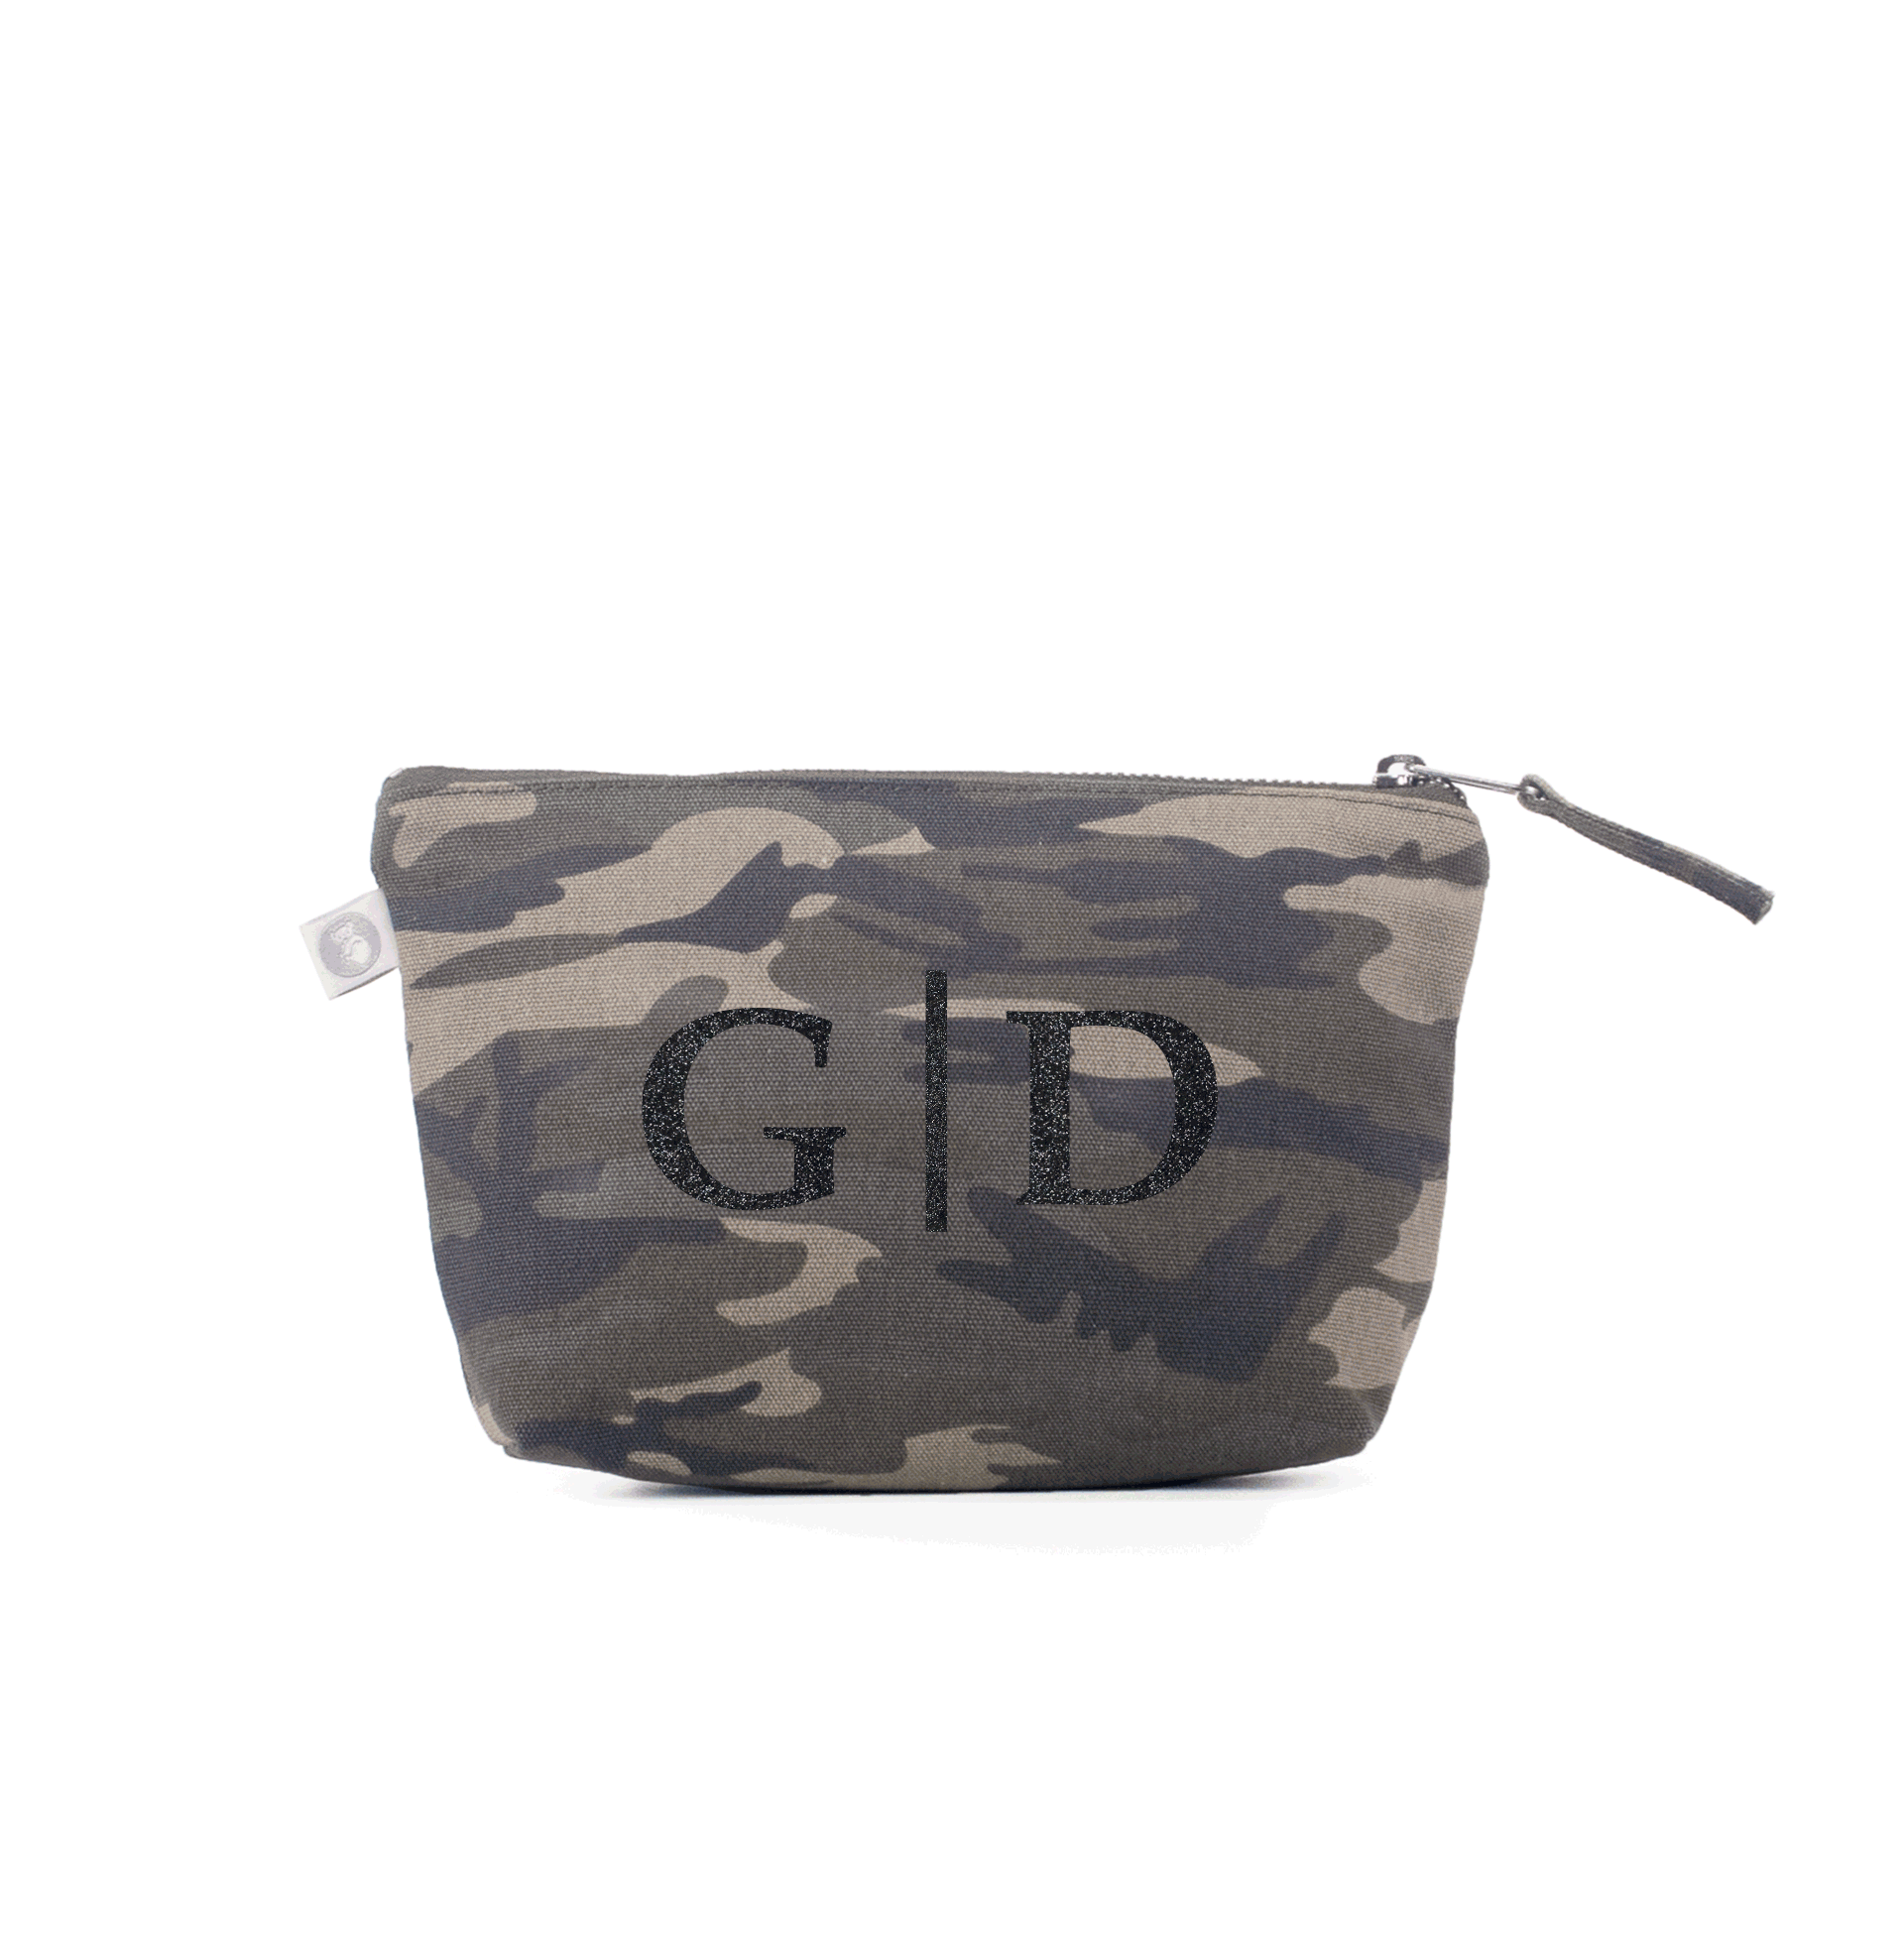 Split Letter Monogram Clutch Bag - perfect gifts! – Quilted Koala